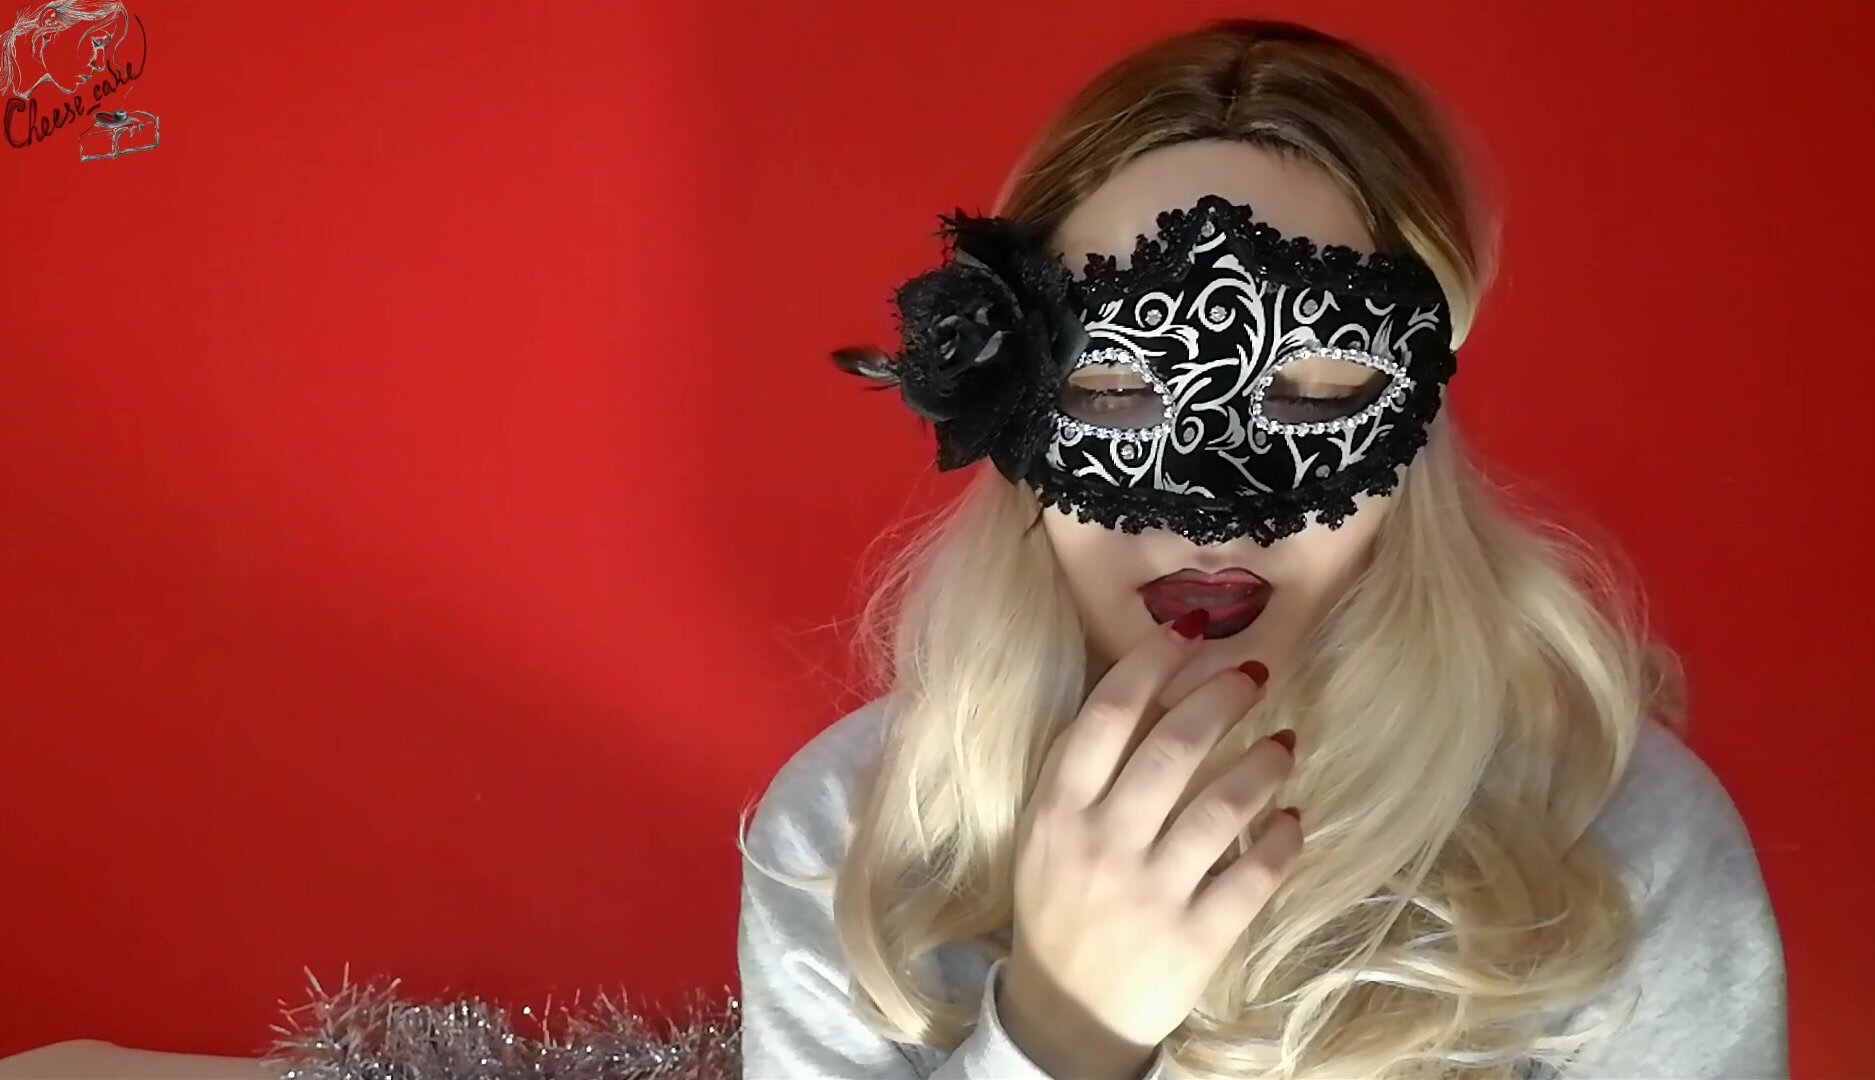 Cheese Cake - Met Her Husband With a Blowjob in a Mask and Stockings (Close up)